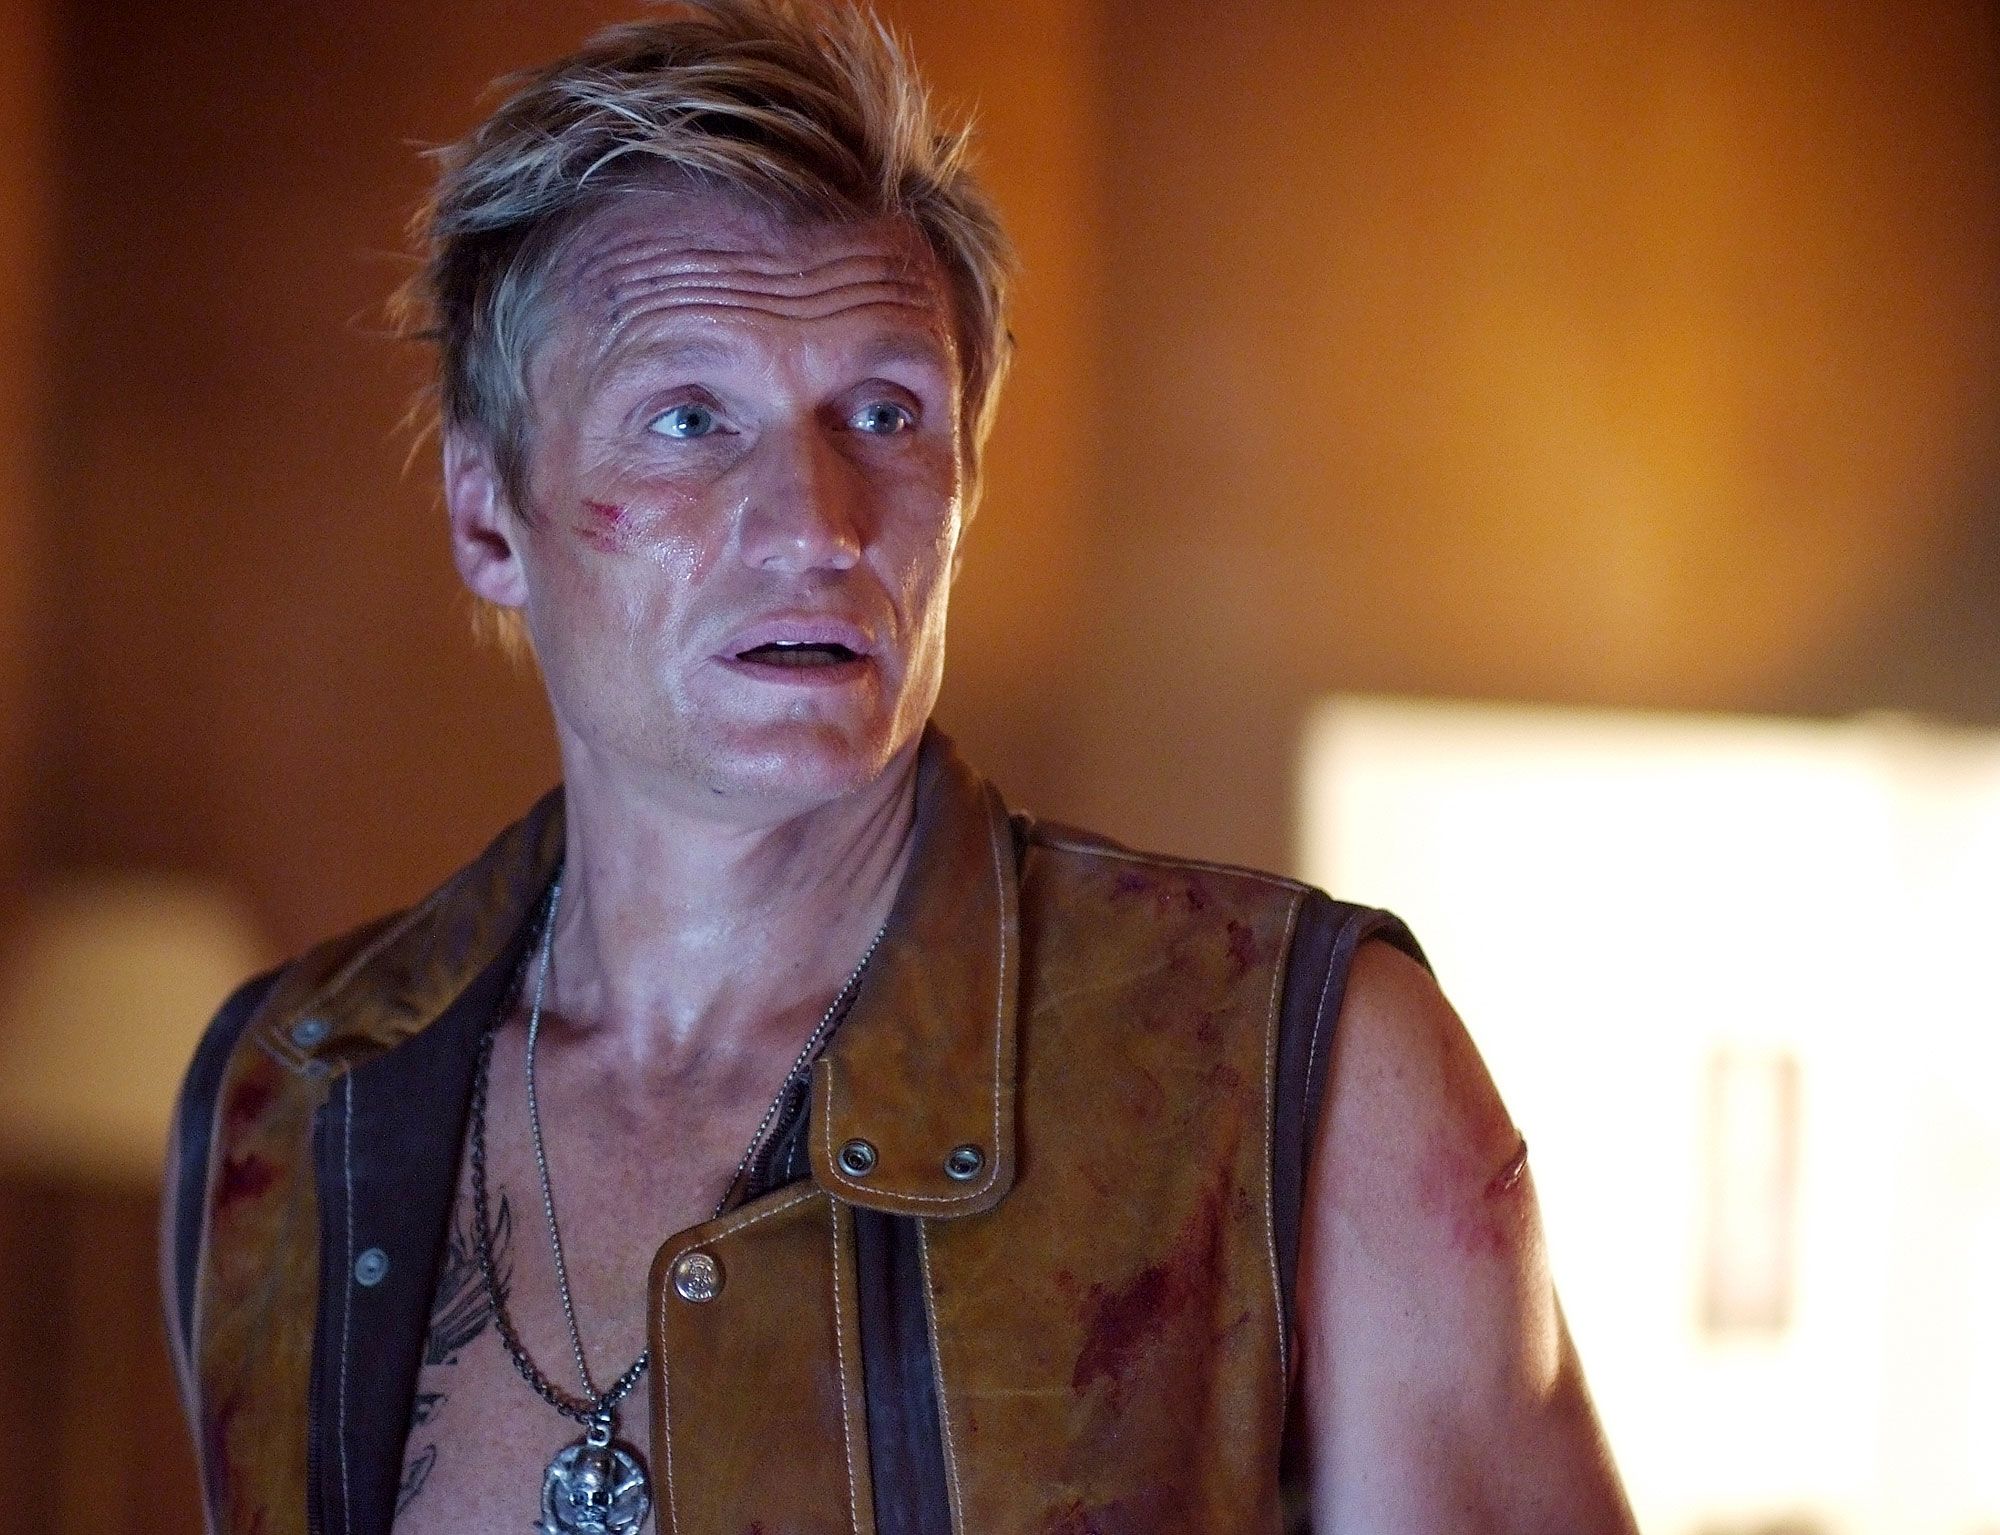 Dolph Lundgren on The Expendables Sequel